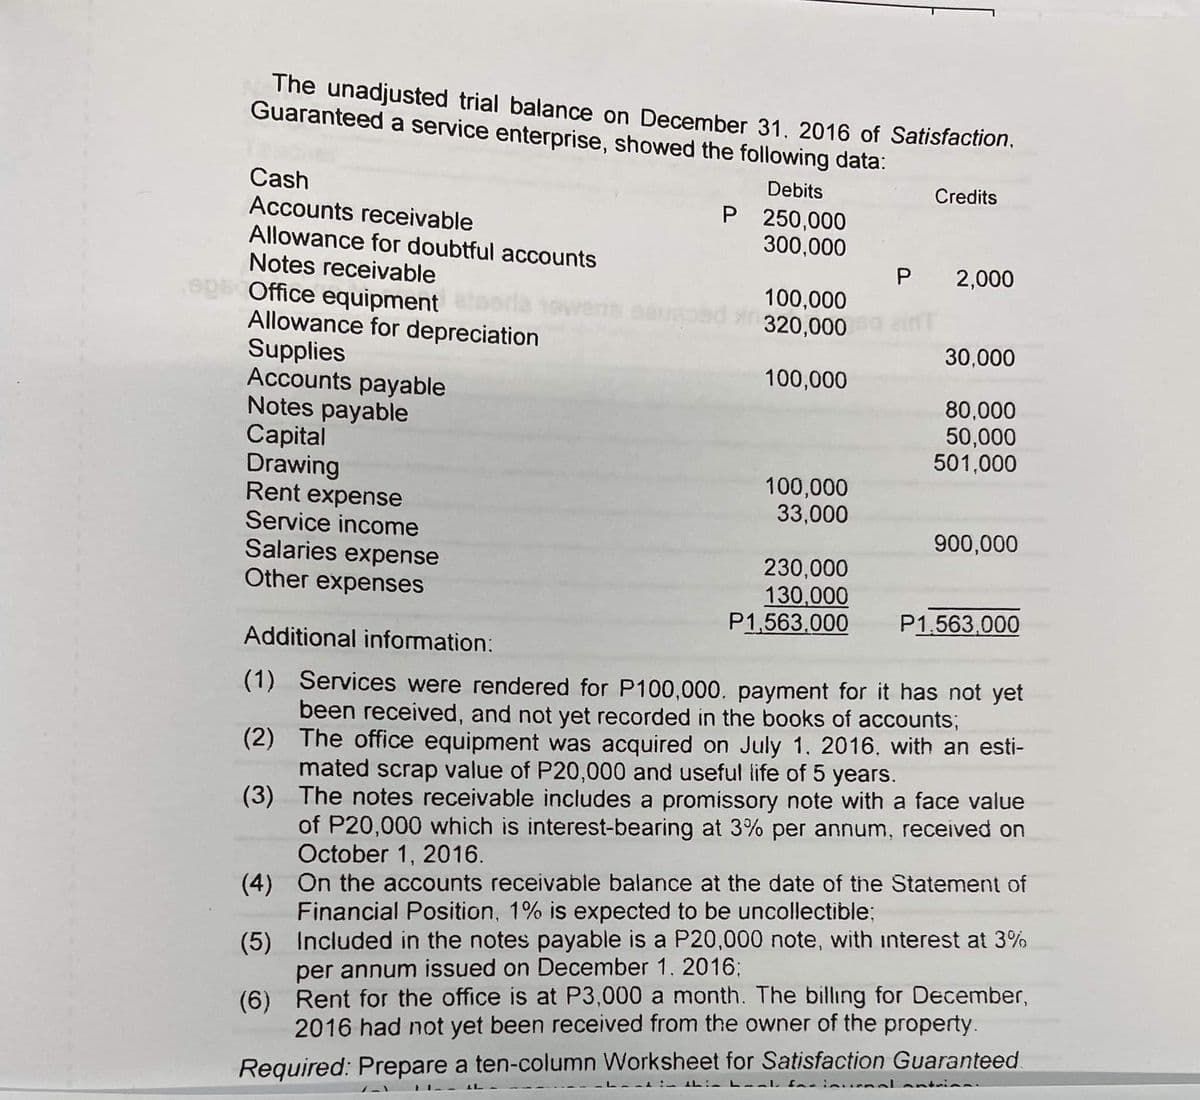 The unadjusted trial balance on December 31, 2016 of Satisfaction,
Guaranteed a service enterprise, showed the following data:
Debits
Cash
Accounts receivable
Allowance for doubtful accounts
Credits
P 250,000
300,000
P 2,000
Notes receivable
ep Office equipment
Allowance for depreciation
Supplies
Accounts payable
Notes payable
Capital
Drawing
Rent expense
100,000
320,000 inT
30,000
100,000
80,000
50,000
501,000
100,000
33,000
Service income
Salaries expense
Other expenses
900,000
230,000
130,000
P1,563,000
P1,563,000
Additional information:
(1) Services were rendered for P100,000. payment for it has not yet
been received, and not yet recorded in the books of accounts;
(2) The office equipment was acquired on July 1. 2016, with an esti-
mated scrap value of P20,000 and useful life of 5 years.
(3) The notes receivable includes a promissory note with a face value
of P20,000 which is interest-bearing at 3% per annum, received on
October 1, 2016.
(4) On the accounts receivable balance at the date of the Statement of
Financial Position, 1% is expected to be uncollectible;
(5) Included in the notes payable is a P20,000 note, with interest at 3%
per annum issued on December 1. 2016;
(6) Rent for the office is at P3,000 a month. The billing for December,
2016 had not yet been received from the owner of the property.
Required: Prepare a ten-column Worksheet for Satisfaction Guaranteed.
ournal ontricn.
